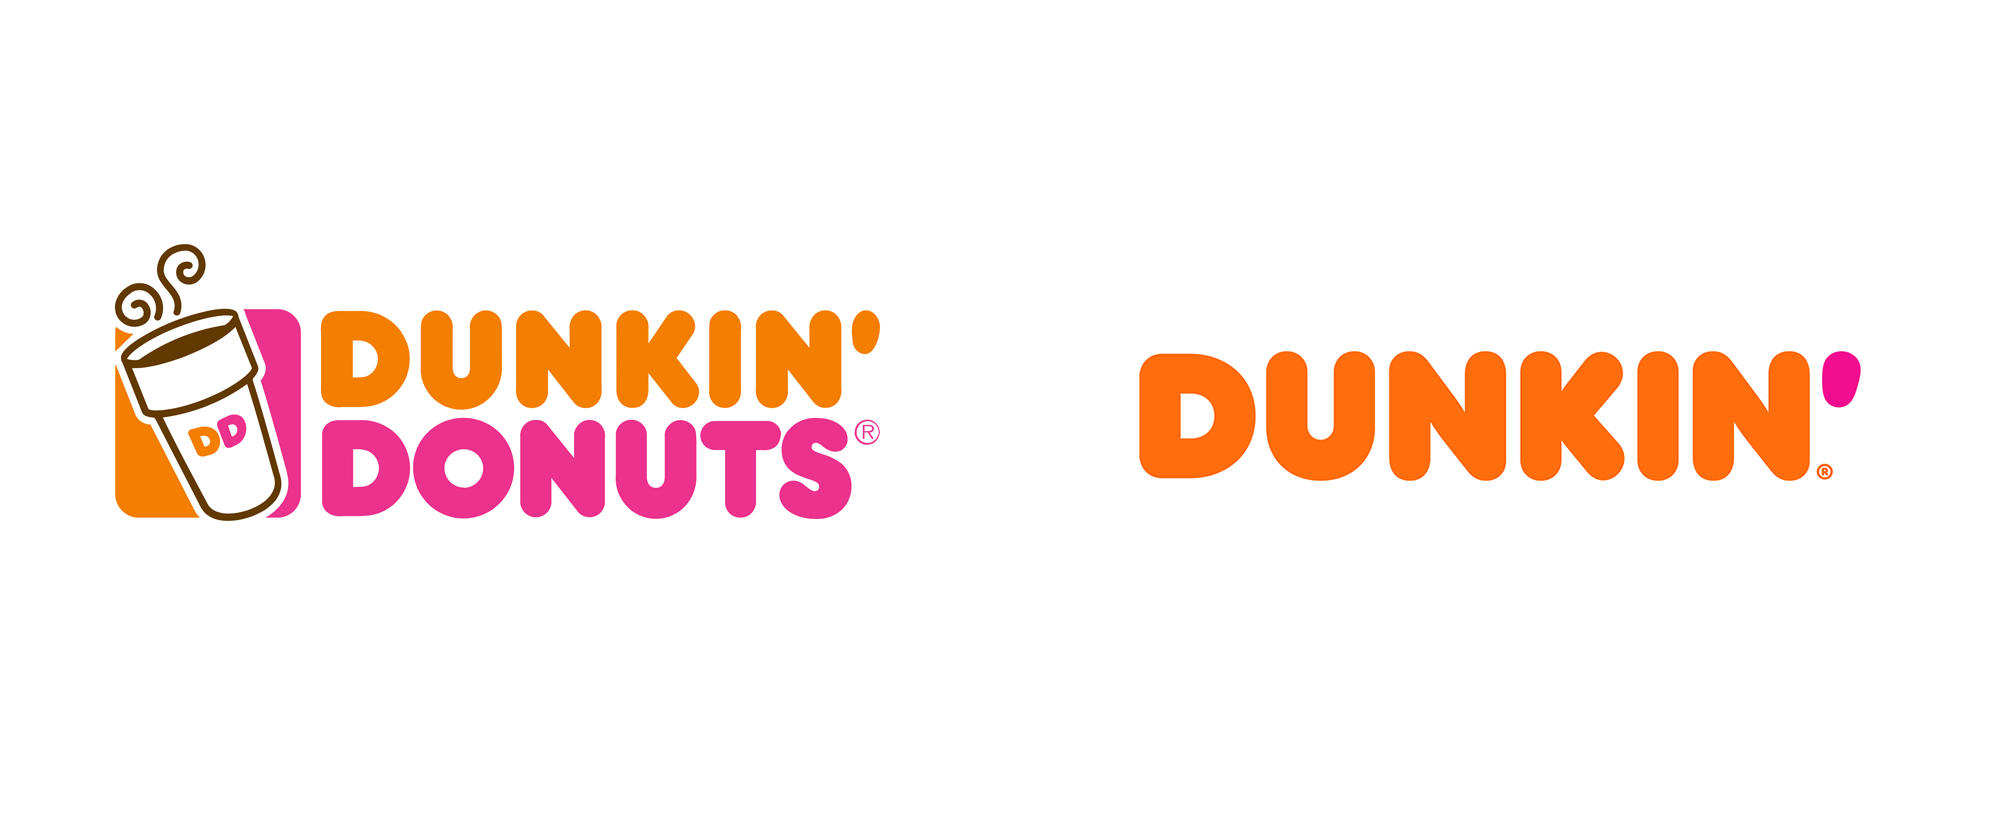 Dunkin' Donuts Logo - Brand New: New Name and Logo for Dunkin' by Jones Knowles Ritchie